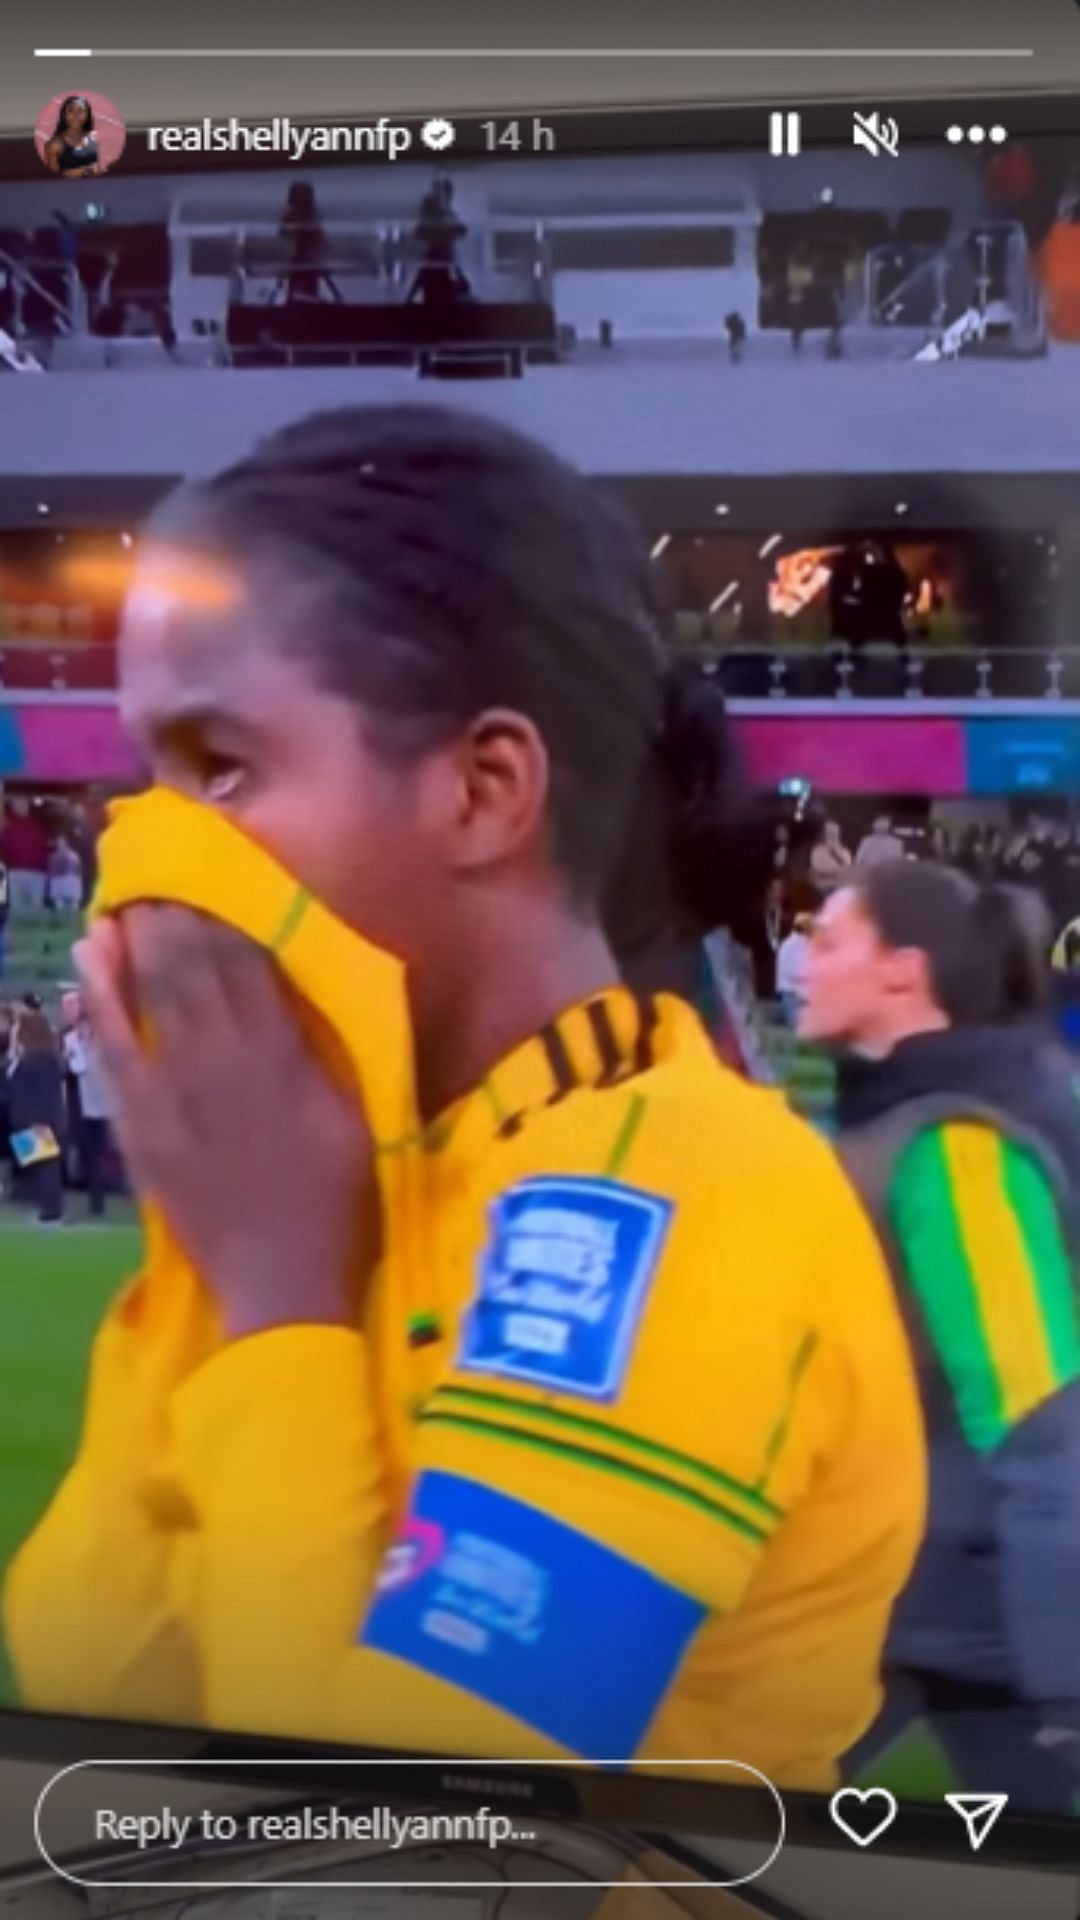 Shelly-Ann Fraser-Pryce posted a story of a Jamaican Footballer celebrating after the match against Brazil